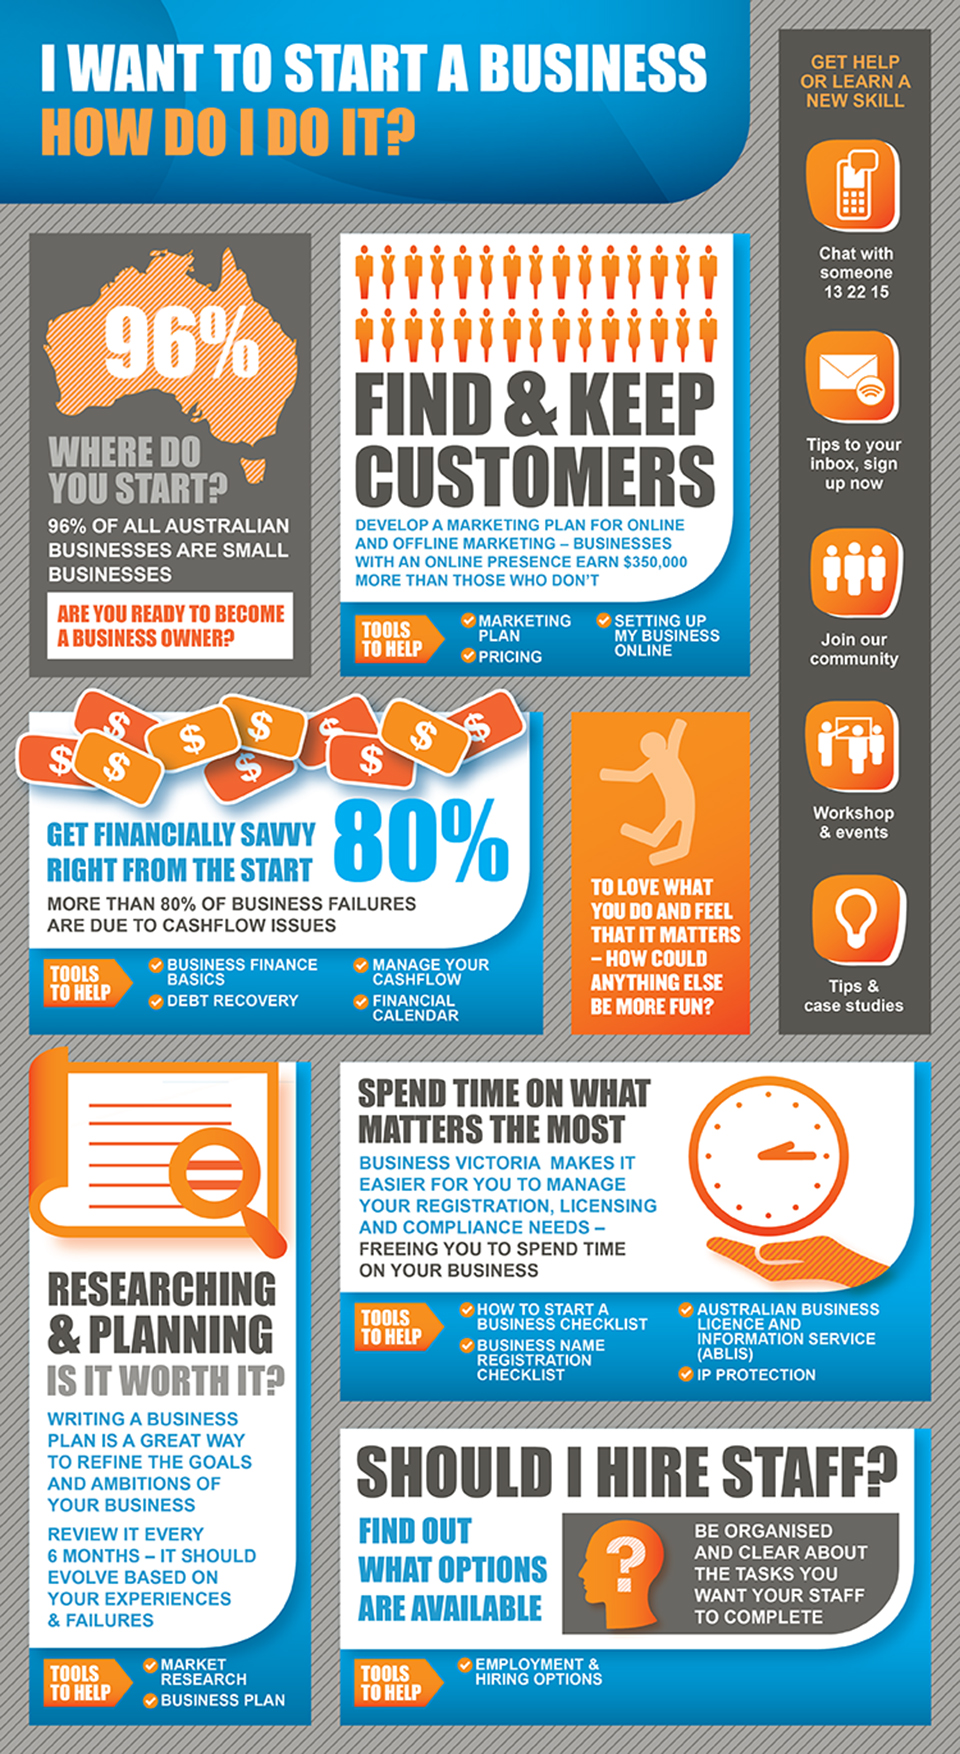 2013 Small Business Outlook Infographic - Barry Moltz